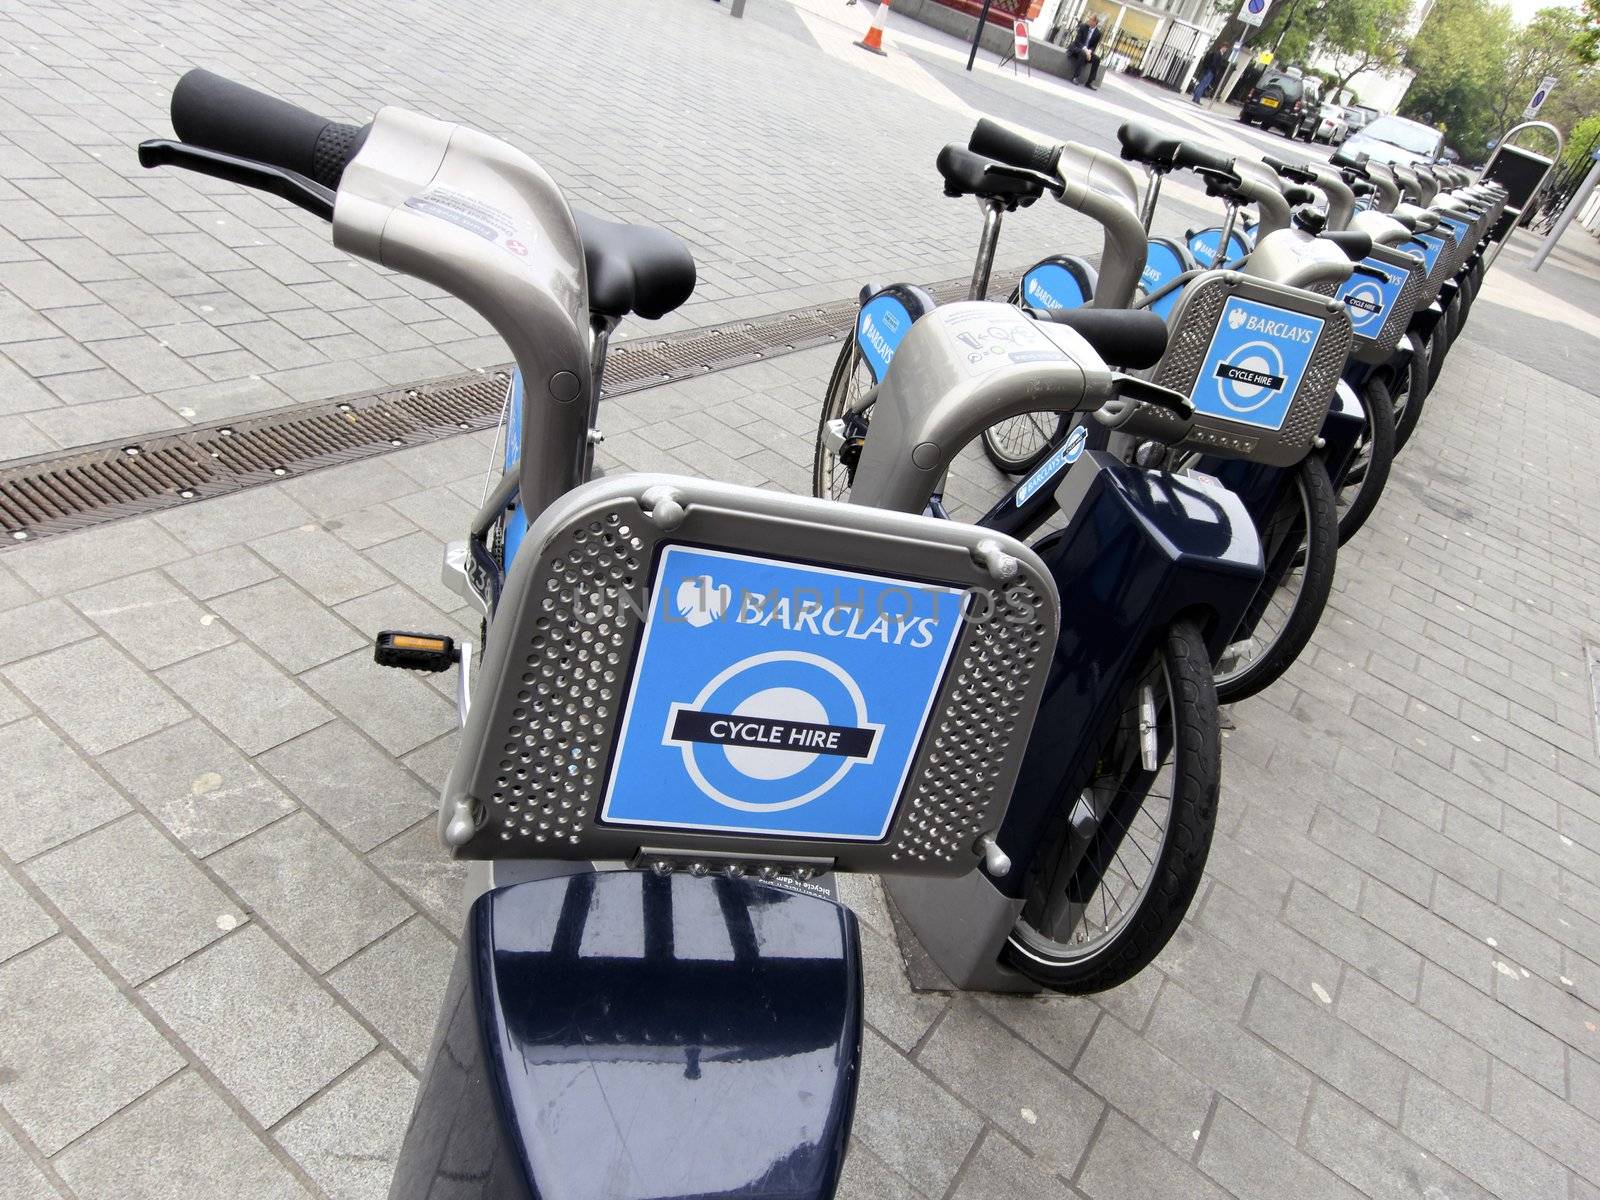 Barclays Cycle Hire rack in London, England, UK